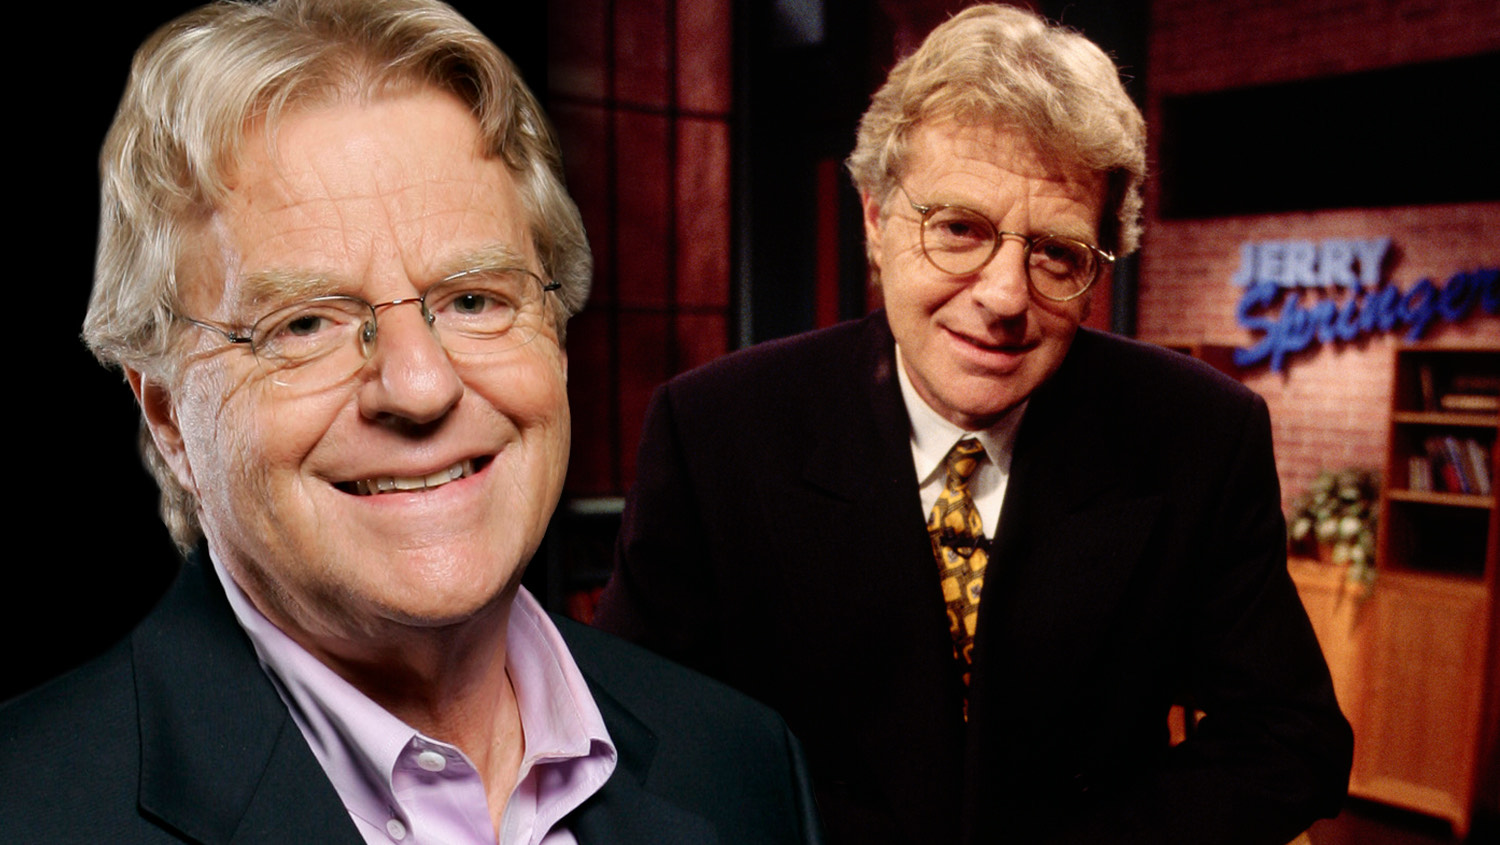 Reality Talk Show Host, Jerry Springer Dies at 79